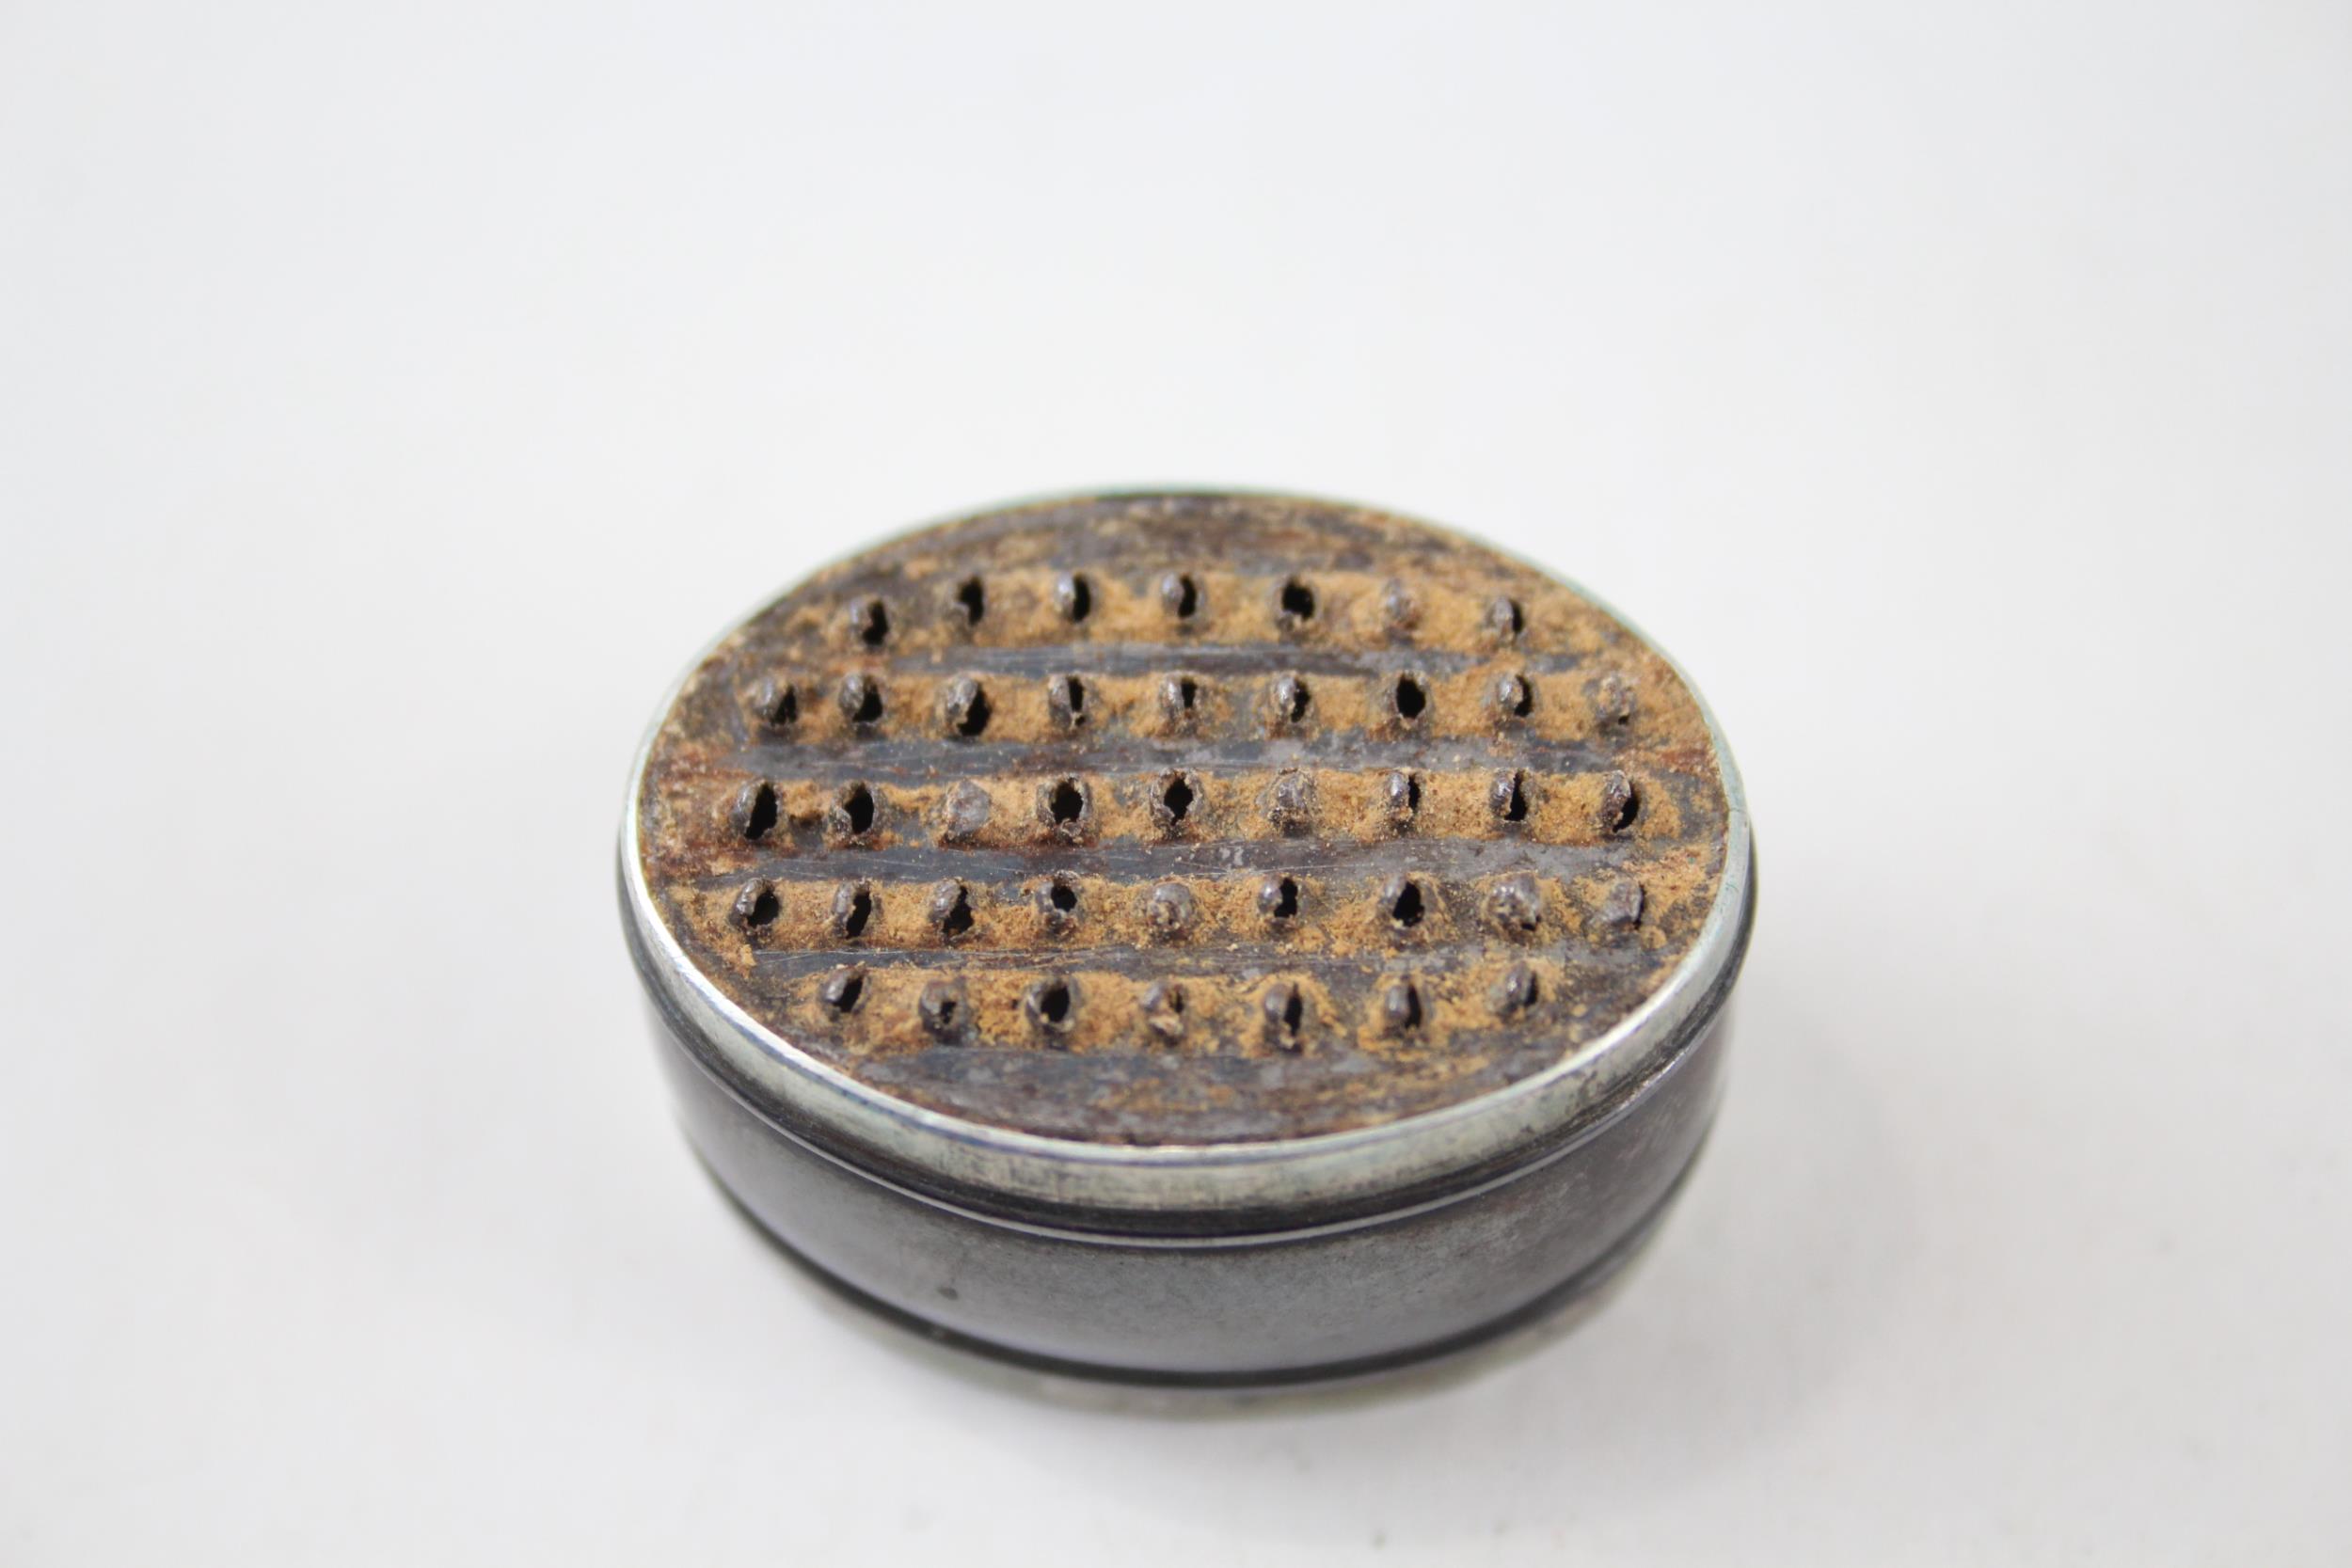 Antique George III 1802 Birmingham Sterling Silver Nutmeg Grater (12g) - Maker - Unidentifiable - Image 4 of 5